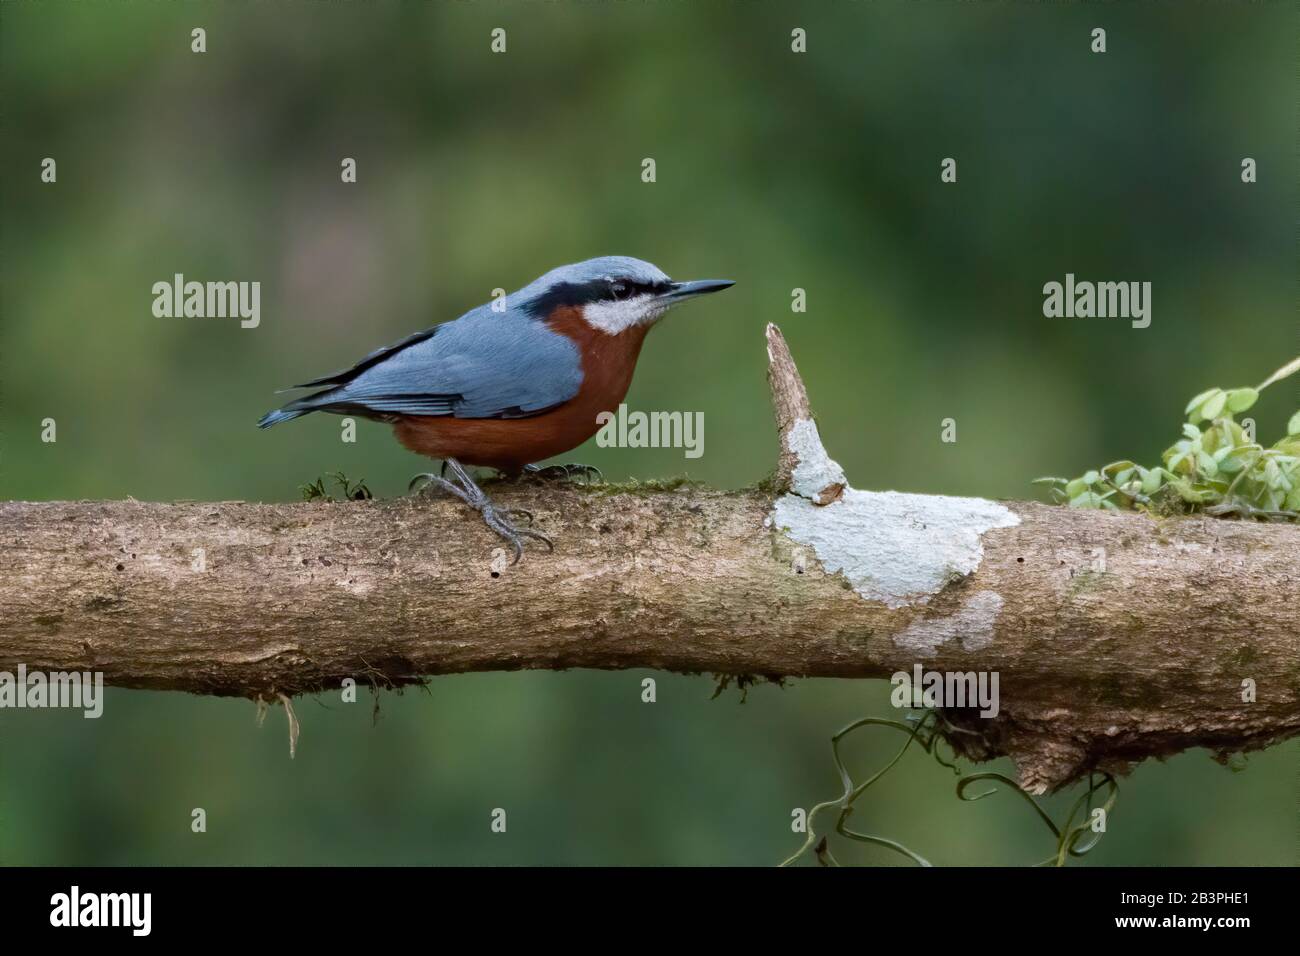 A small Chestnut-bellied nuthatch (Sitta cinnamoventris), beautifully perched on a tree branch. Stock Photo